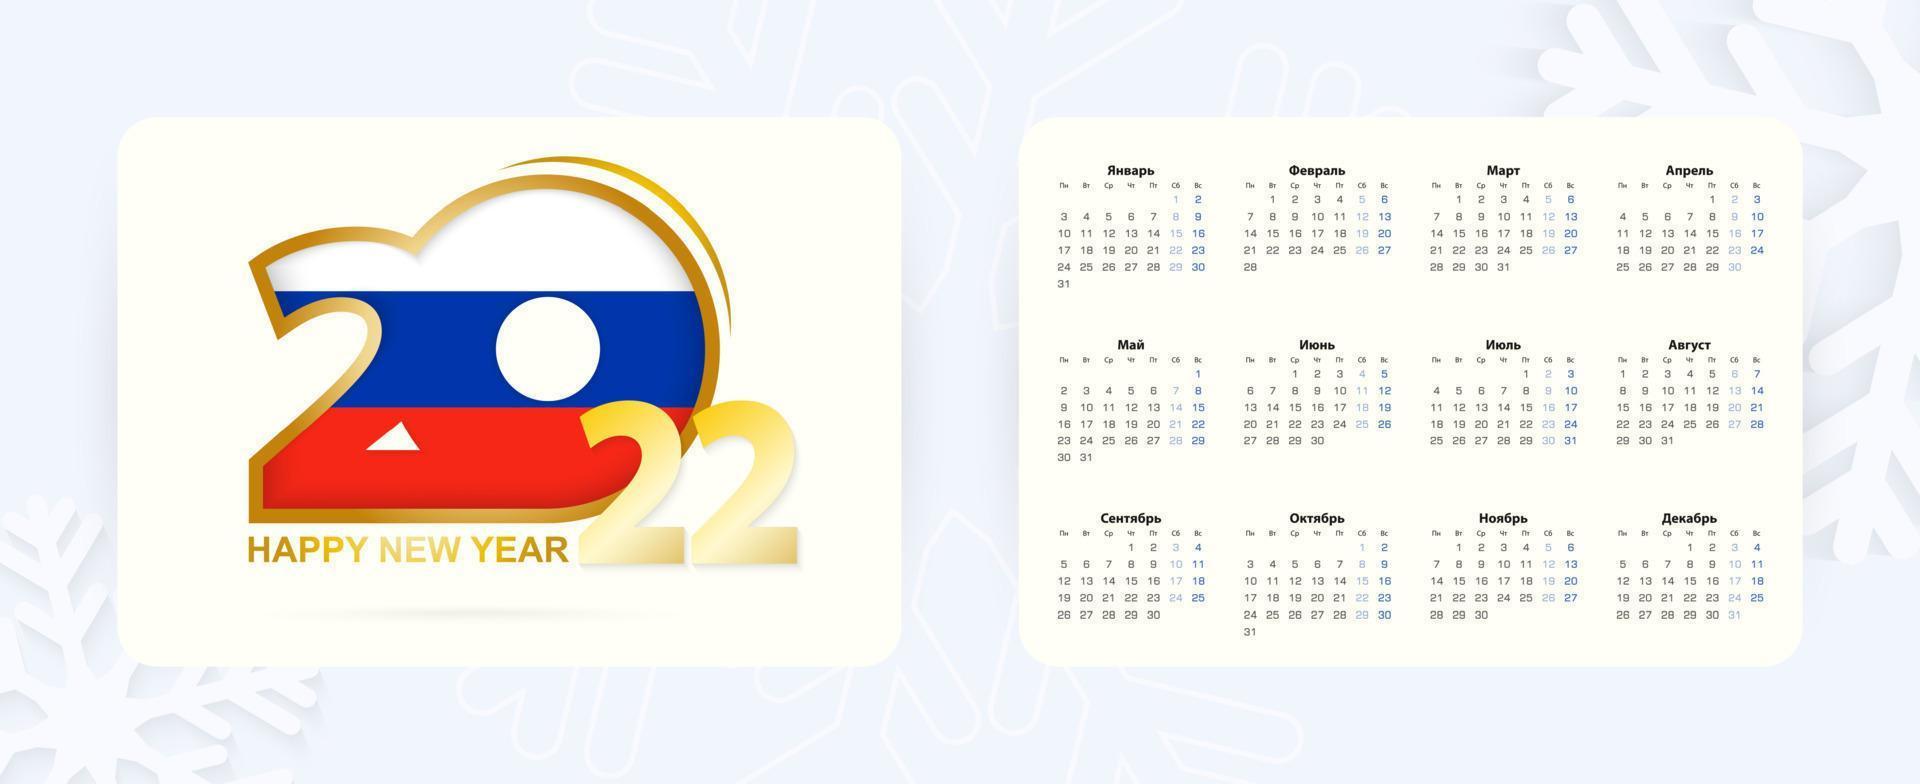 Horizontal Pocket Calendar 2022 in Russian language. New Year 2022 icon with flag of Russia. vector